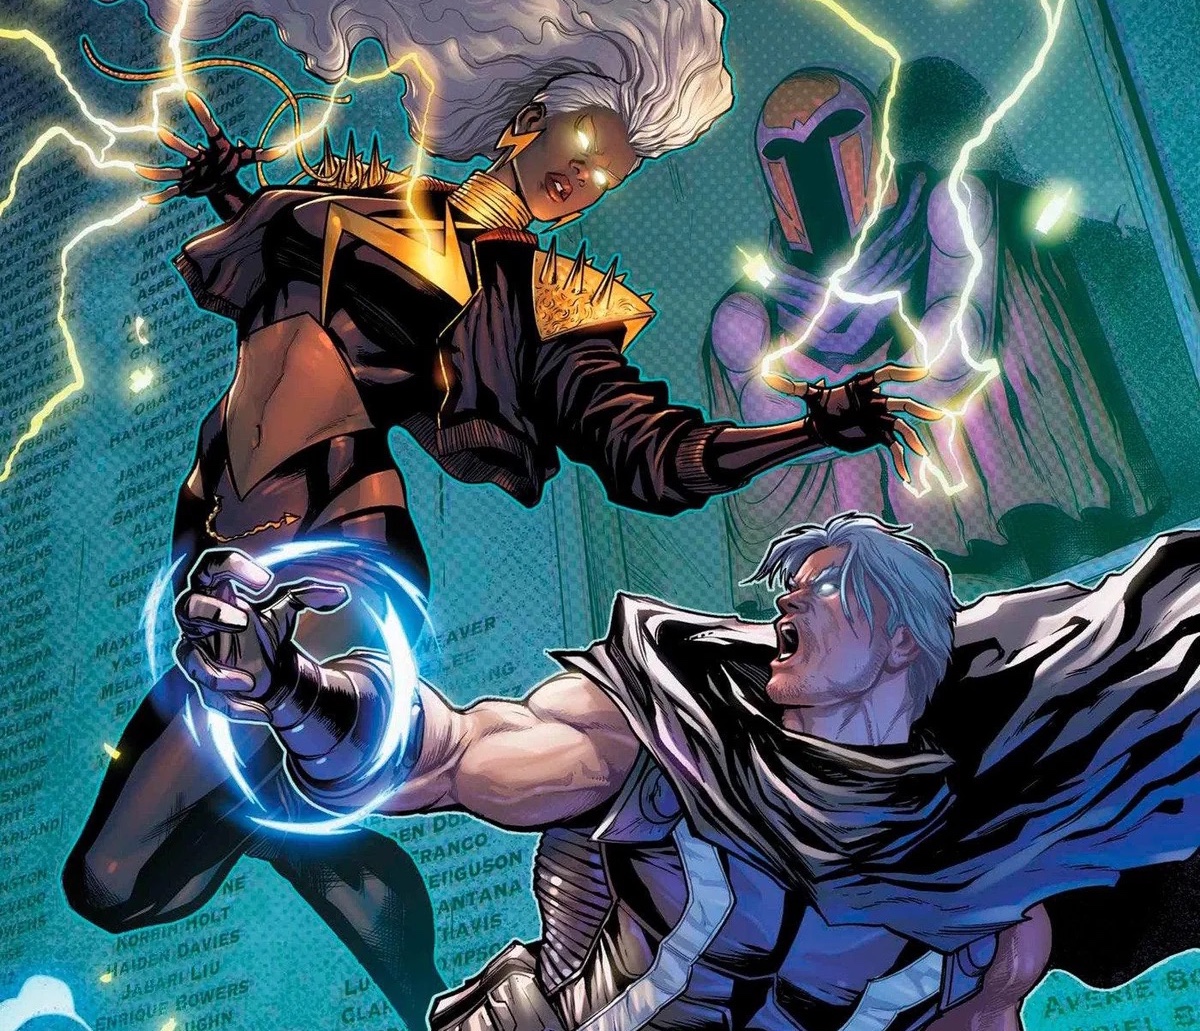 Magneto and Storm battle on the cropped cover of Resurrection of Magneto #2